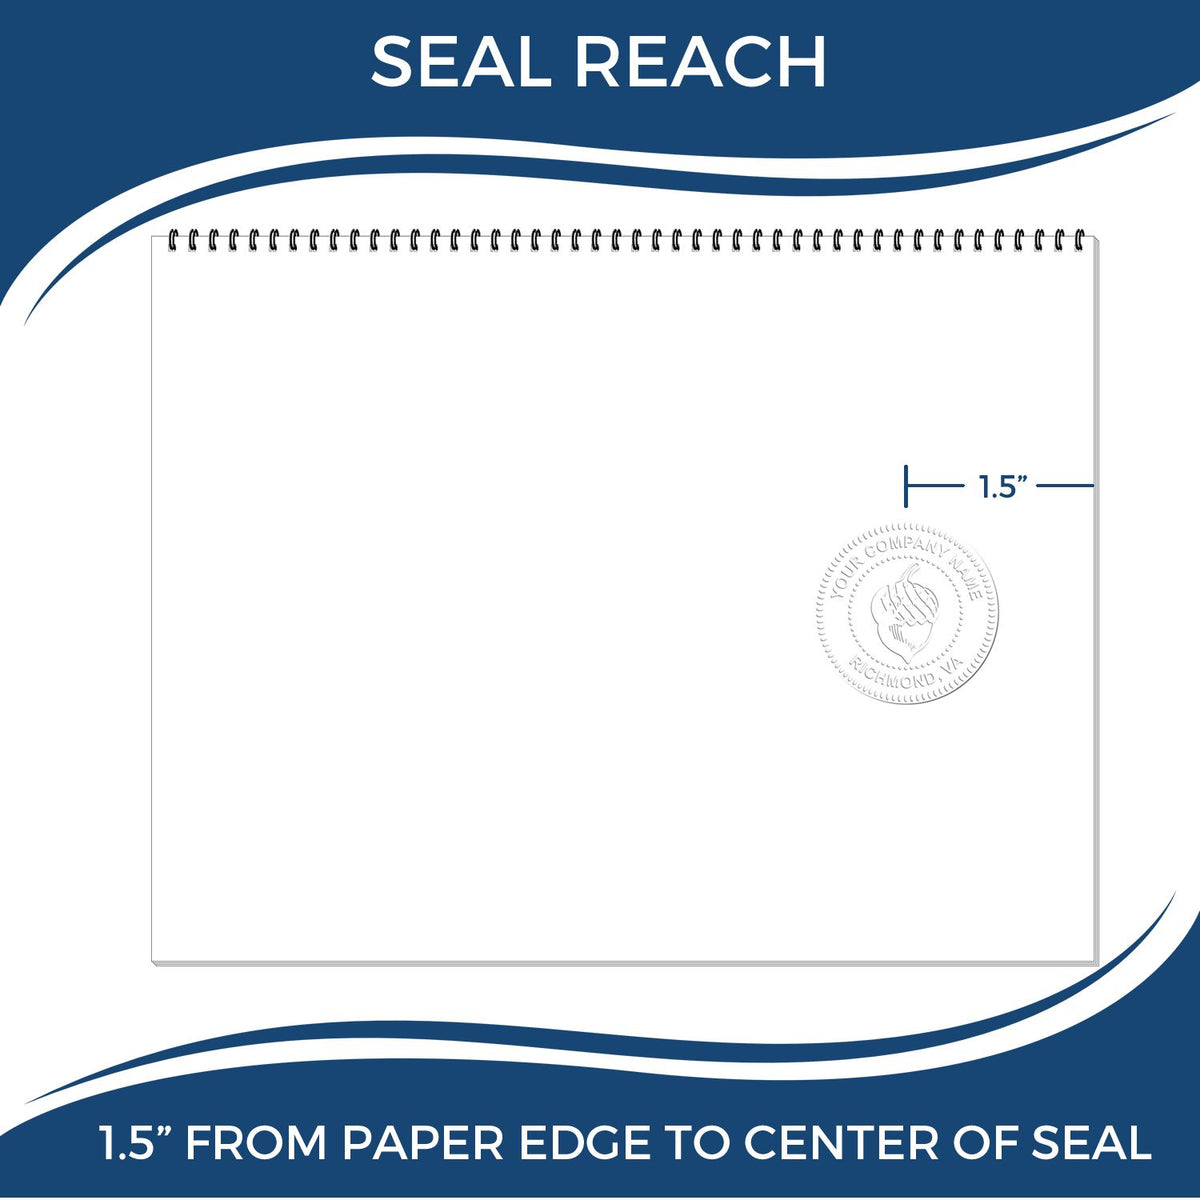 An infographic showing the seal reach which is represented by a ruler and a miniature seal image of the State of Maine Architectural Seal Embosser